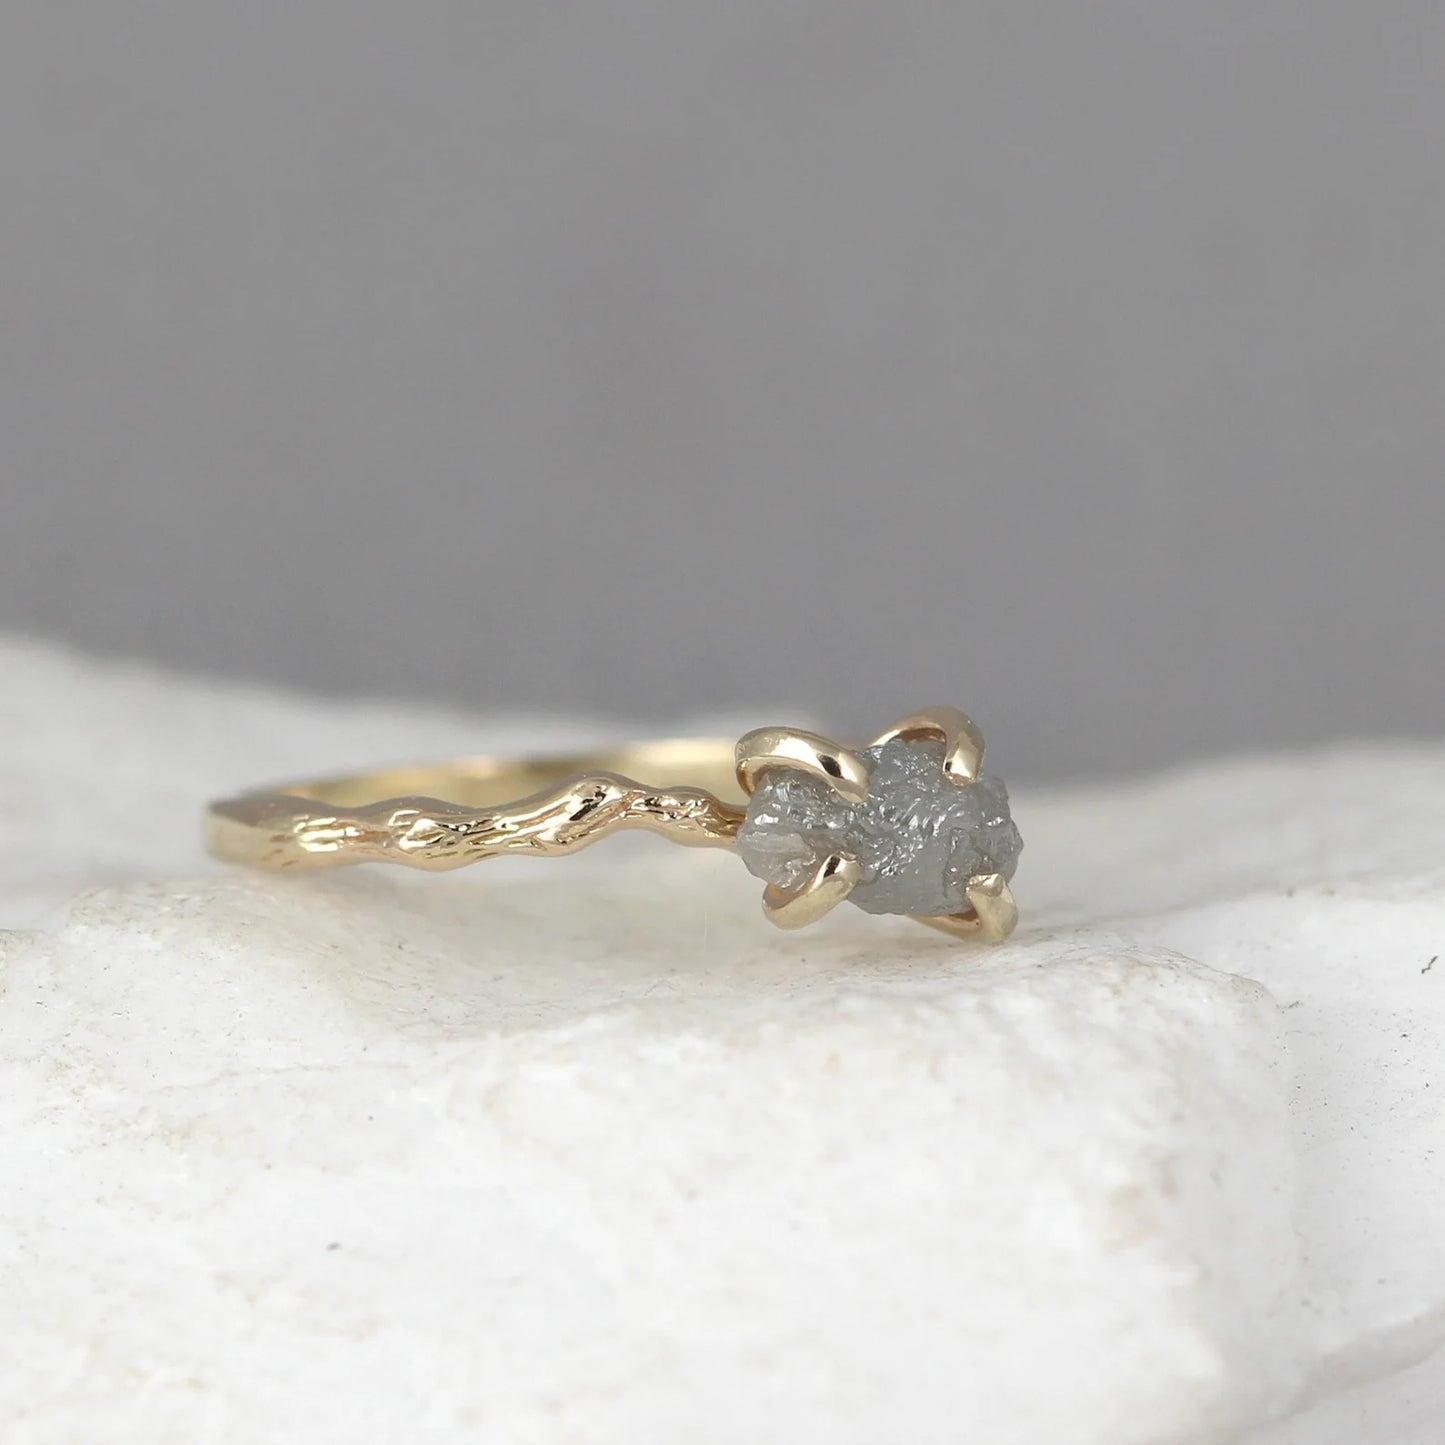 Twig Engagement Ring - Raw Uncut Rough Diamond Twig Ring - 14K Yellow Gold Branch Rings - Tree Branch Wedding Ring - Made in Canada